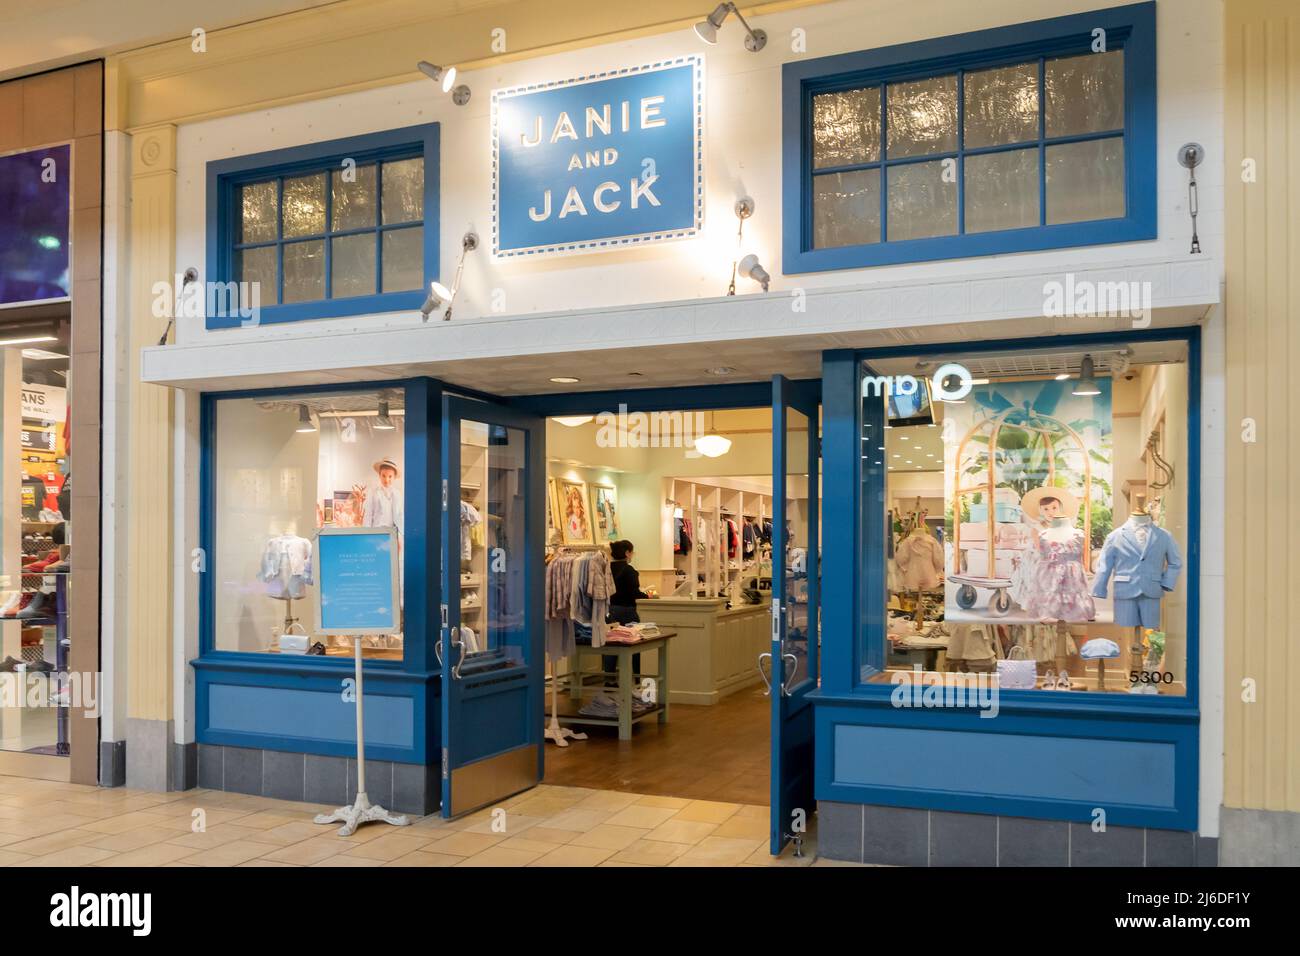 Houston, Texas, USA - February 25, 2022: Janie and Jack store in a shopping mall. Stock Photo